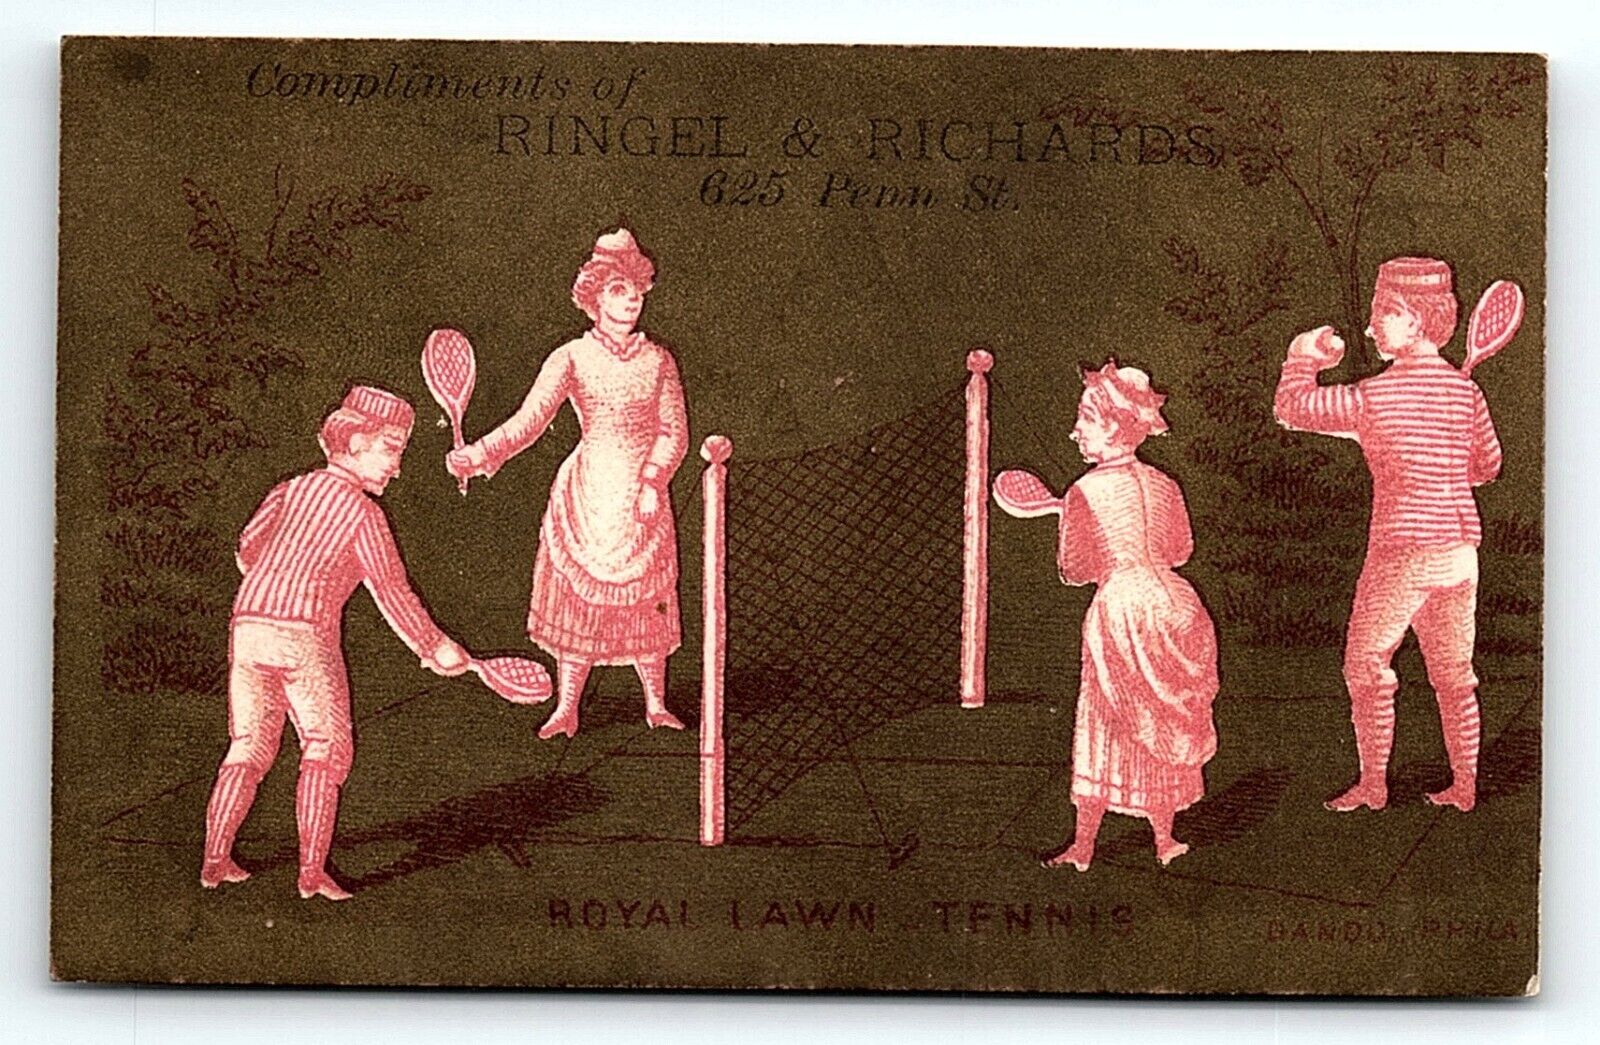 c1880 READING PA LAWN TENNIS RINGEL & RICHARDS BOOKS STATIONERY TRADE CARD P1909